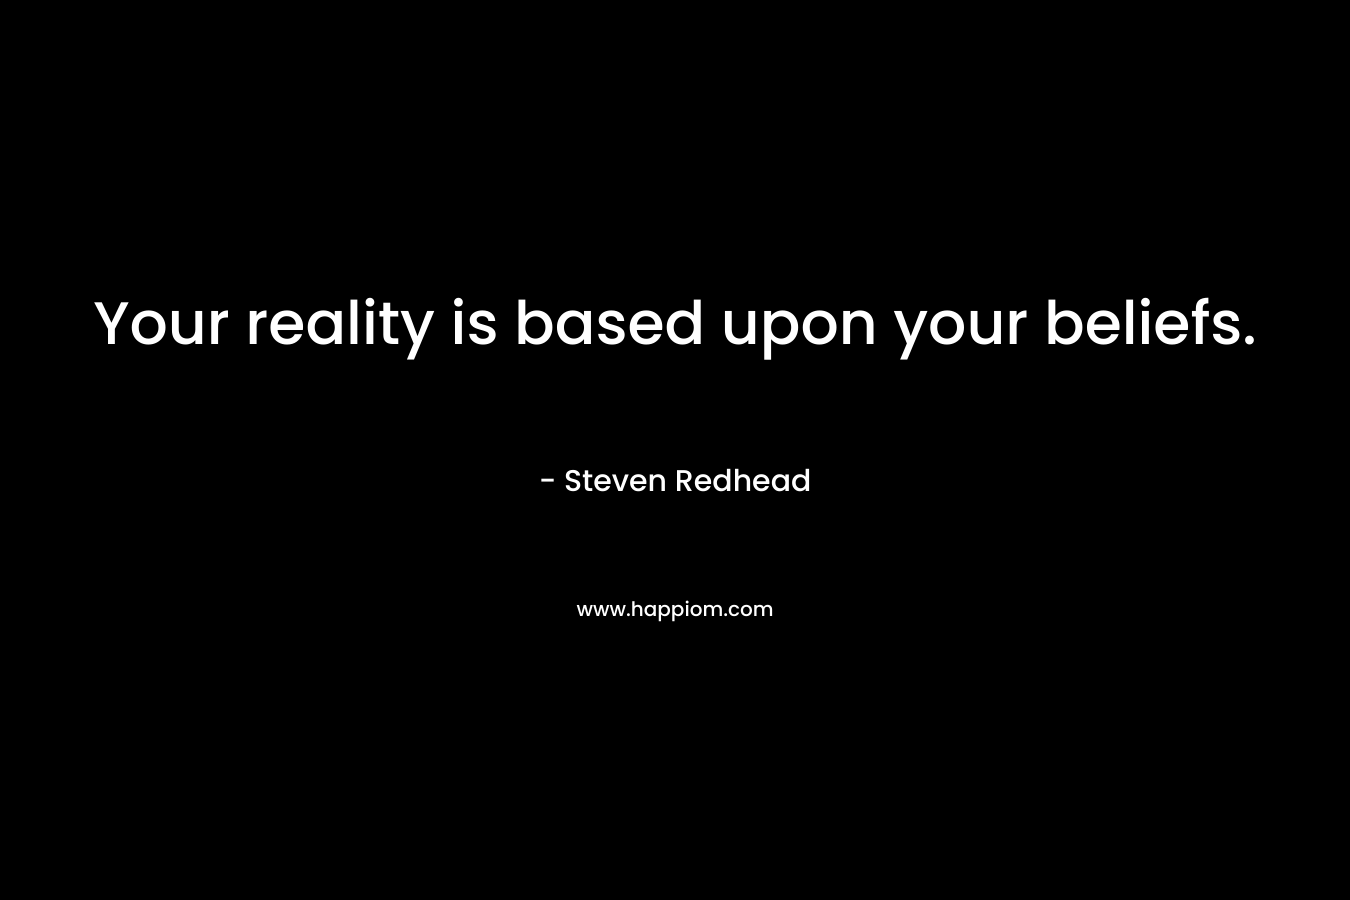 Your reality is based upon your beliefs.